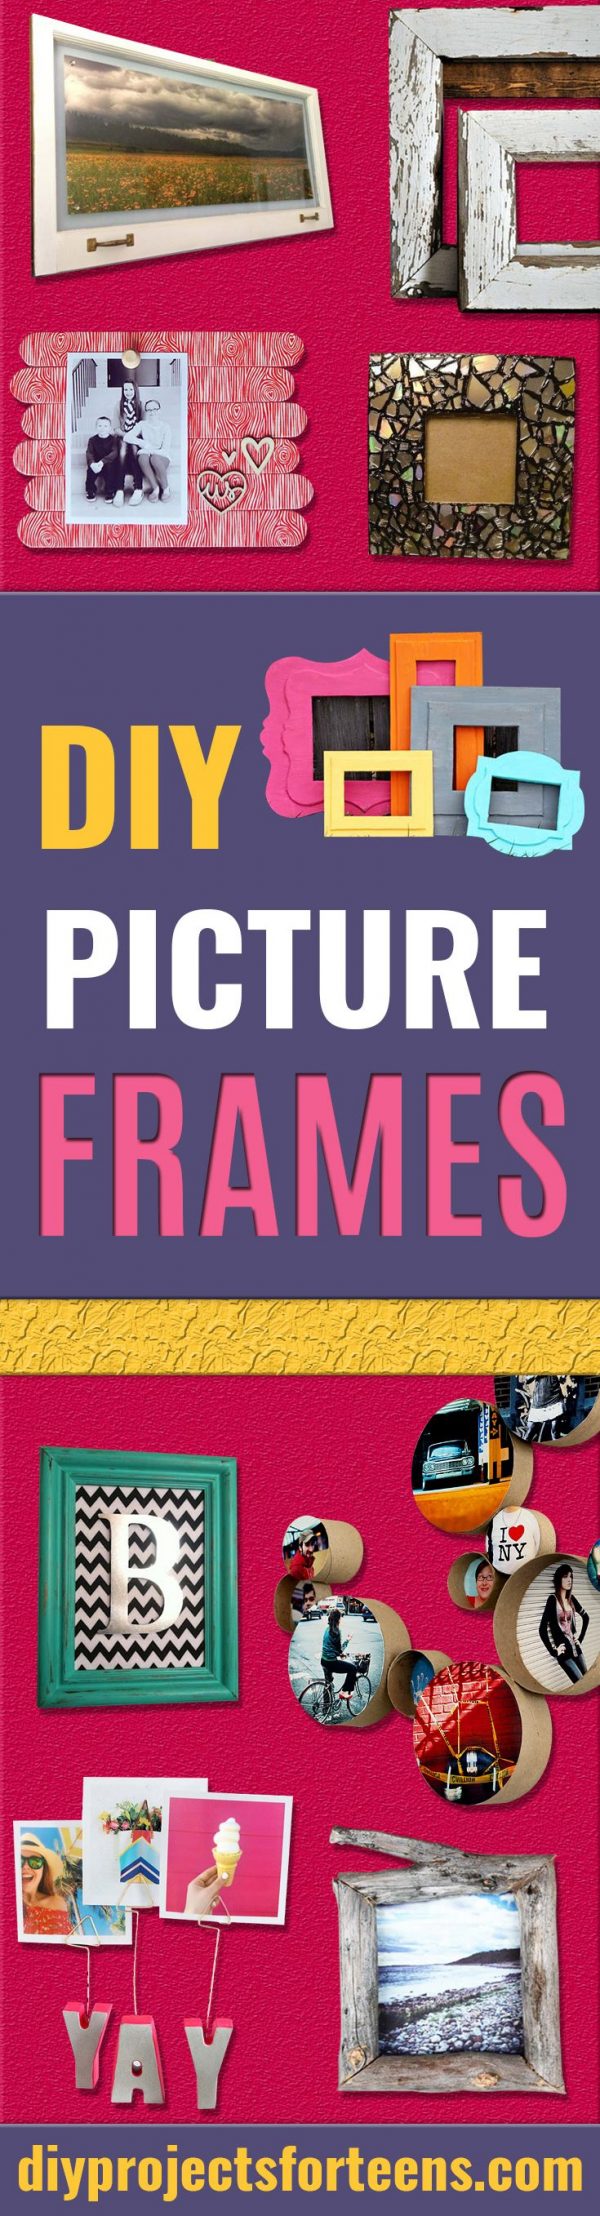 Best DIY Picture Frames and Photo Frame Ideas - How To Make Cool Handmade Projects from Wood, Canvas, Instagram Photos. Creative Birthday Gifts, Fun Crafts for Friends and Wall Art Tutorials #diyideas #diygifts #teencrafts